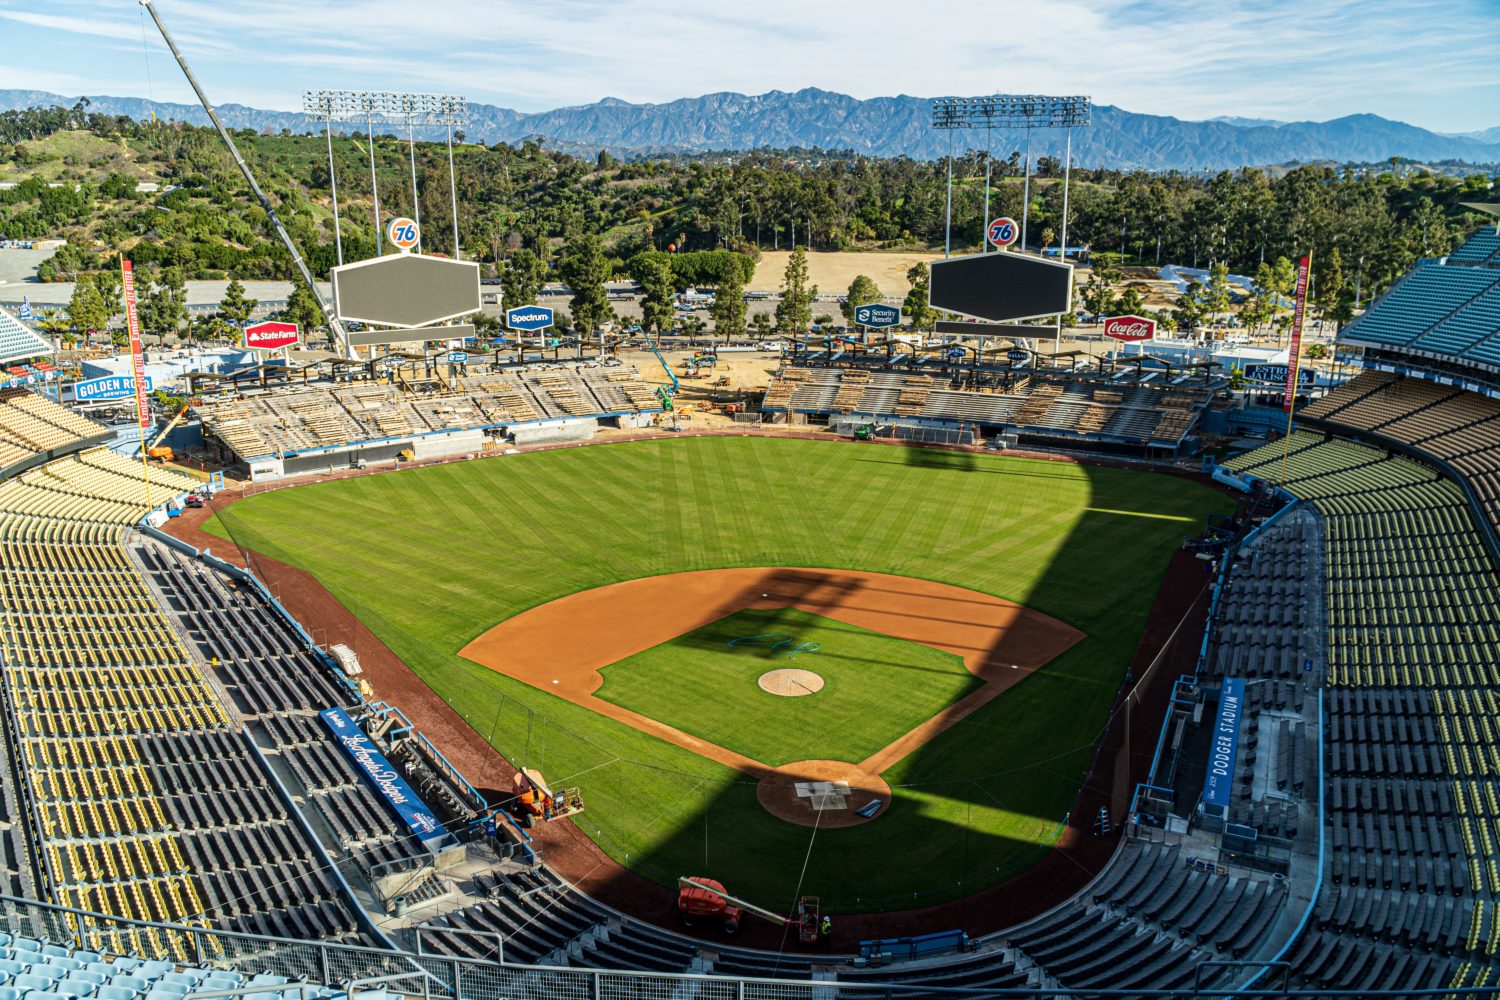 The Los Angeles Dodgers debut fully vaccinated seating section for